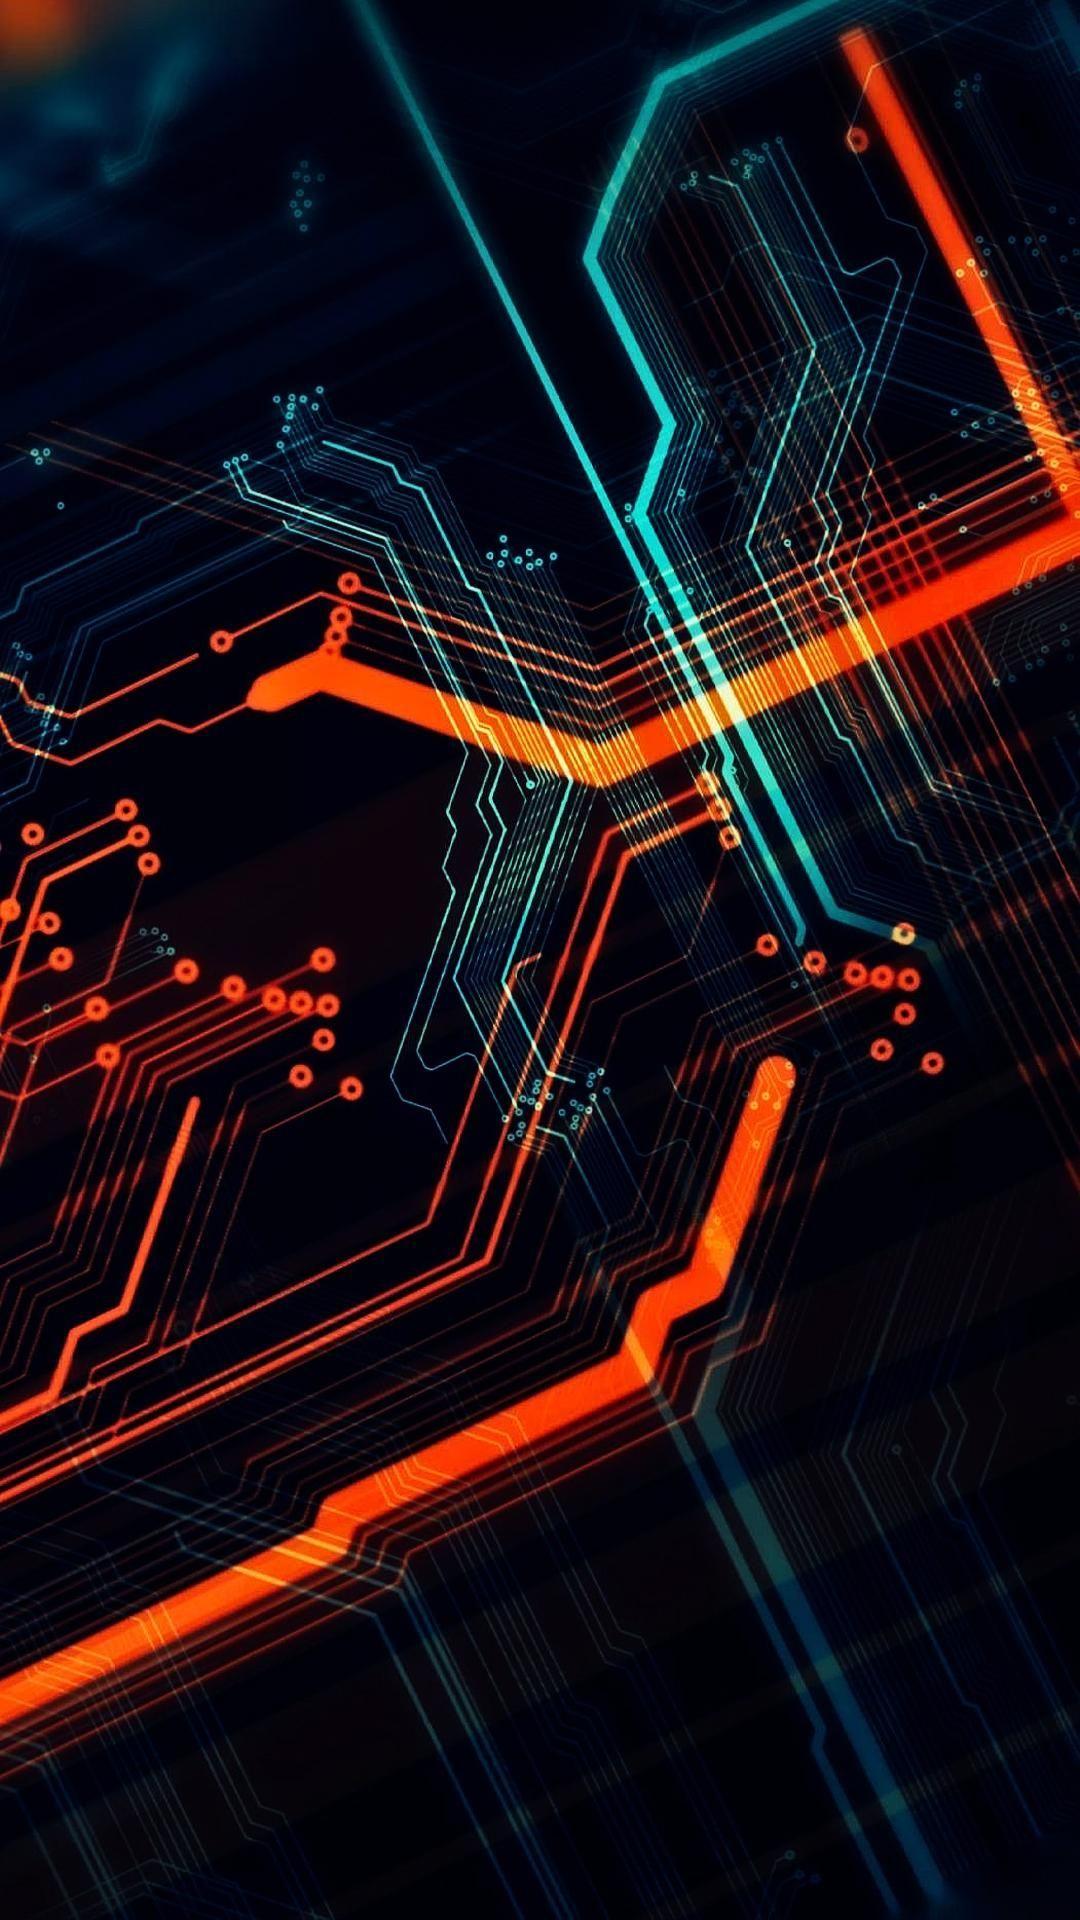 Digital Circuit board Animation Live Wallpaper Apk Download for Android  Latest version 106 comwallpaperstudiohaiCircuitboard